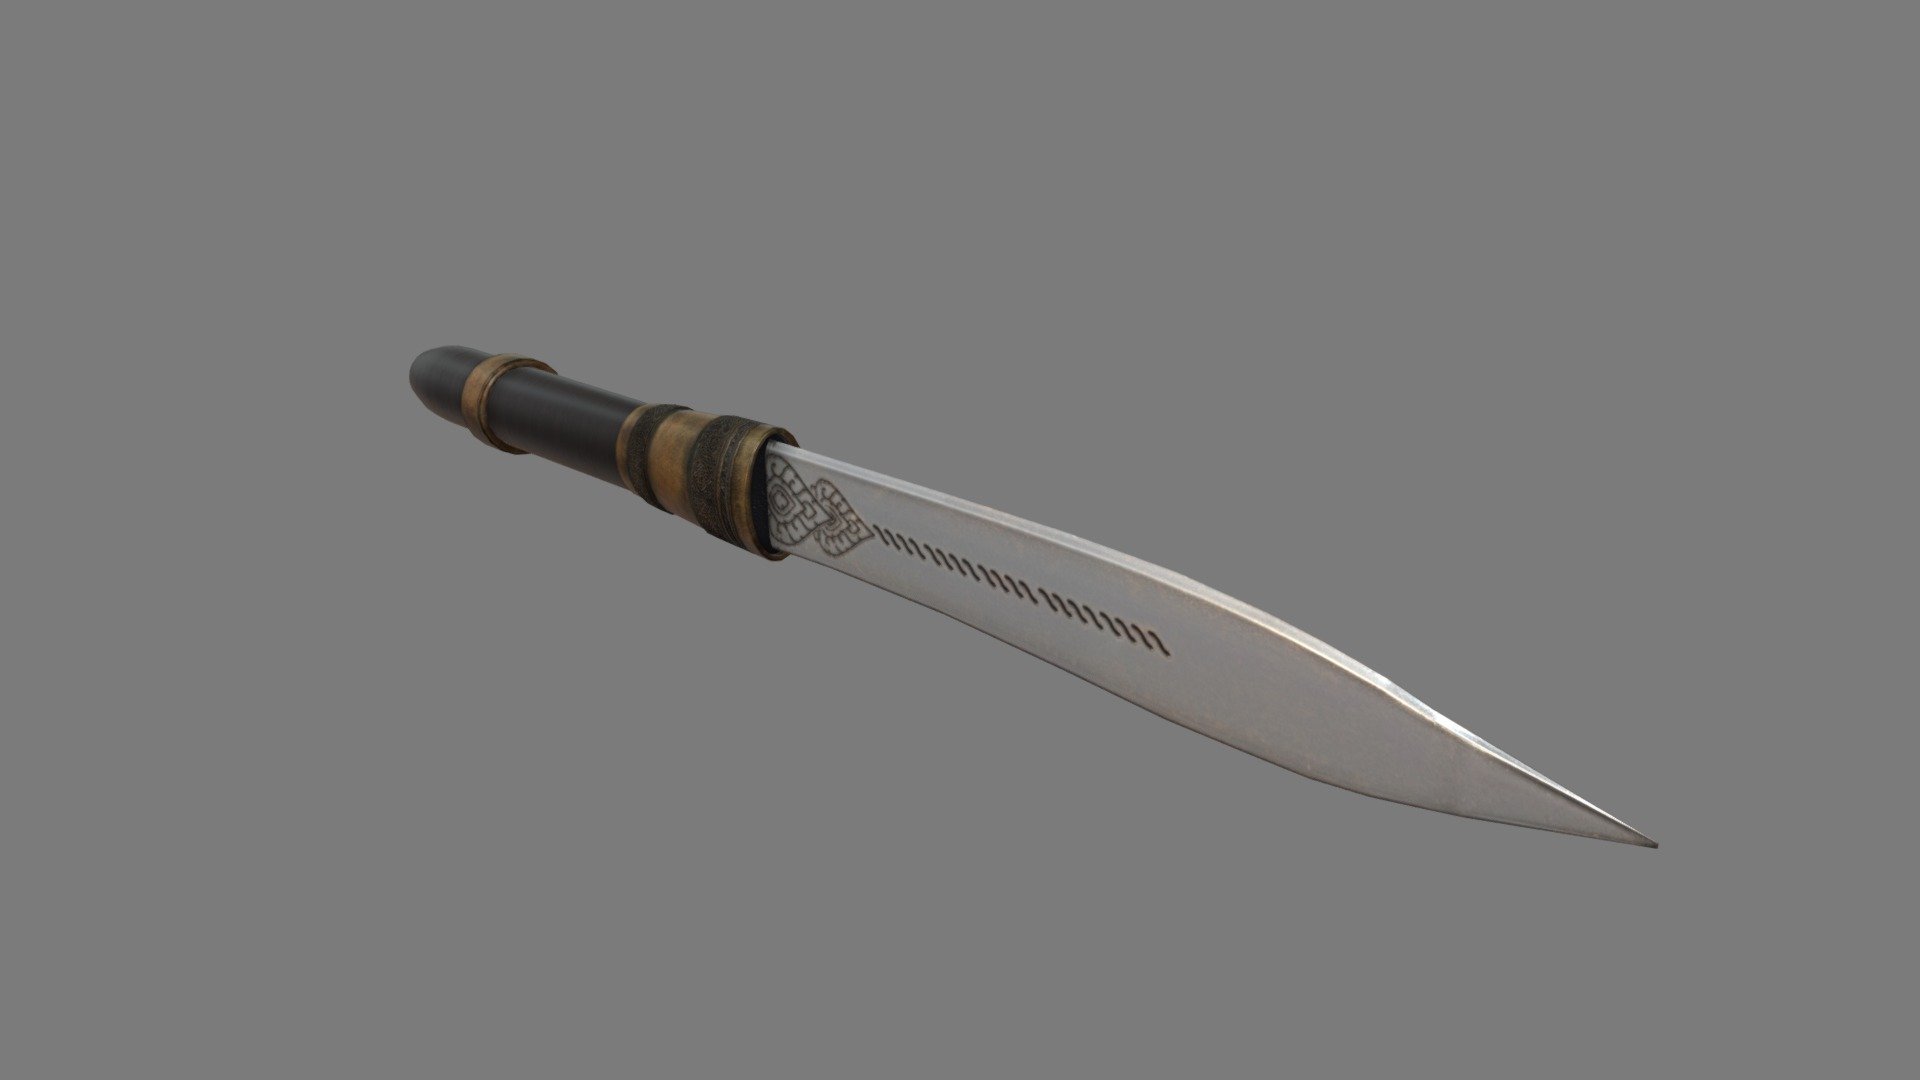 Necro Knife model in Thai style.

Poly: 632
Vertex: 640
in subdivision level 0

2048x2048 PNG Texture
Include Diffuse, Metalic and Normal

3ds max,FBX,OBJ and texture files in additional file 3d model